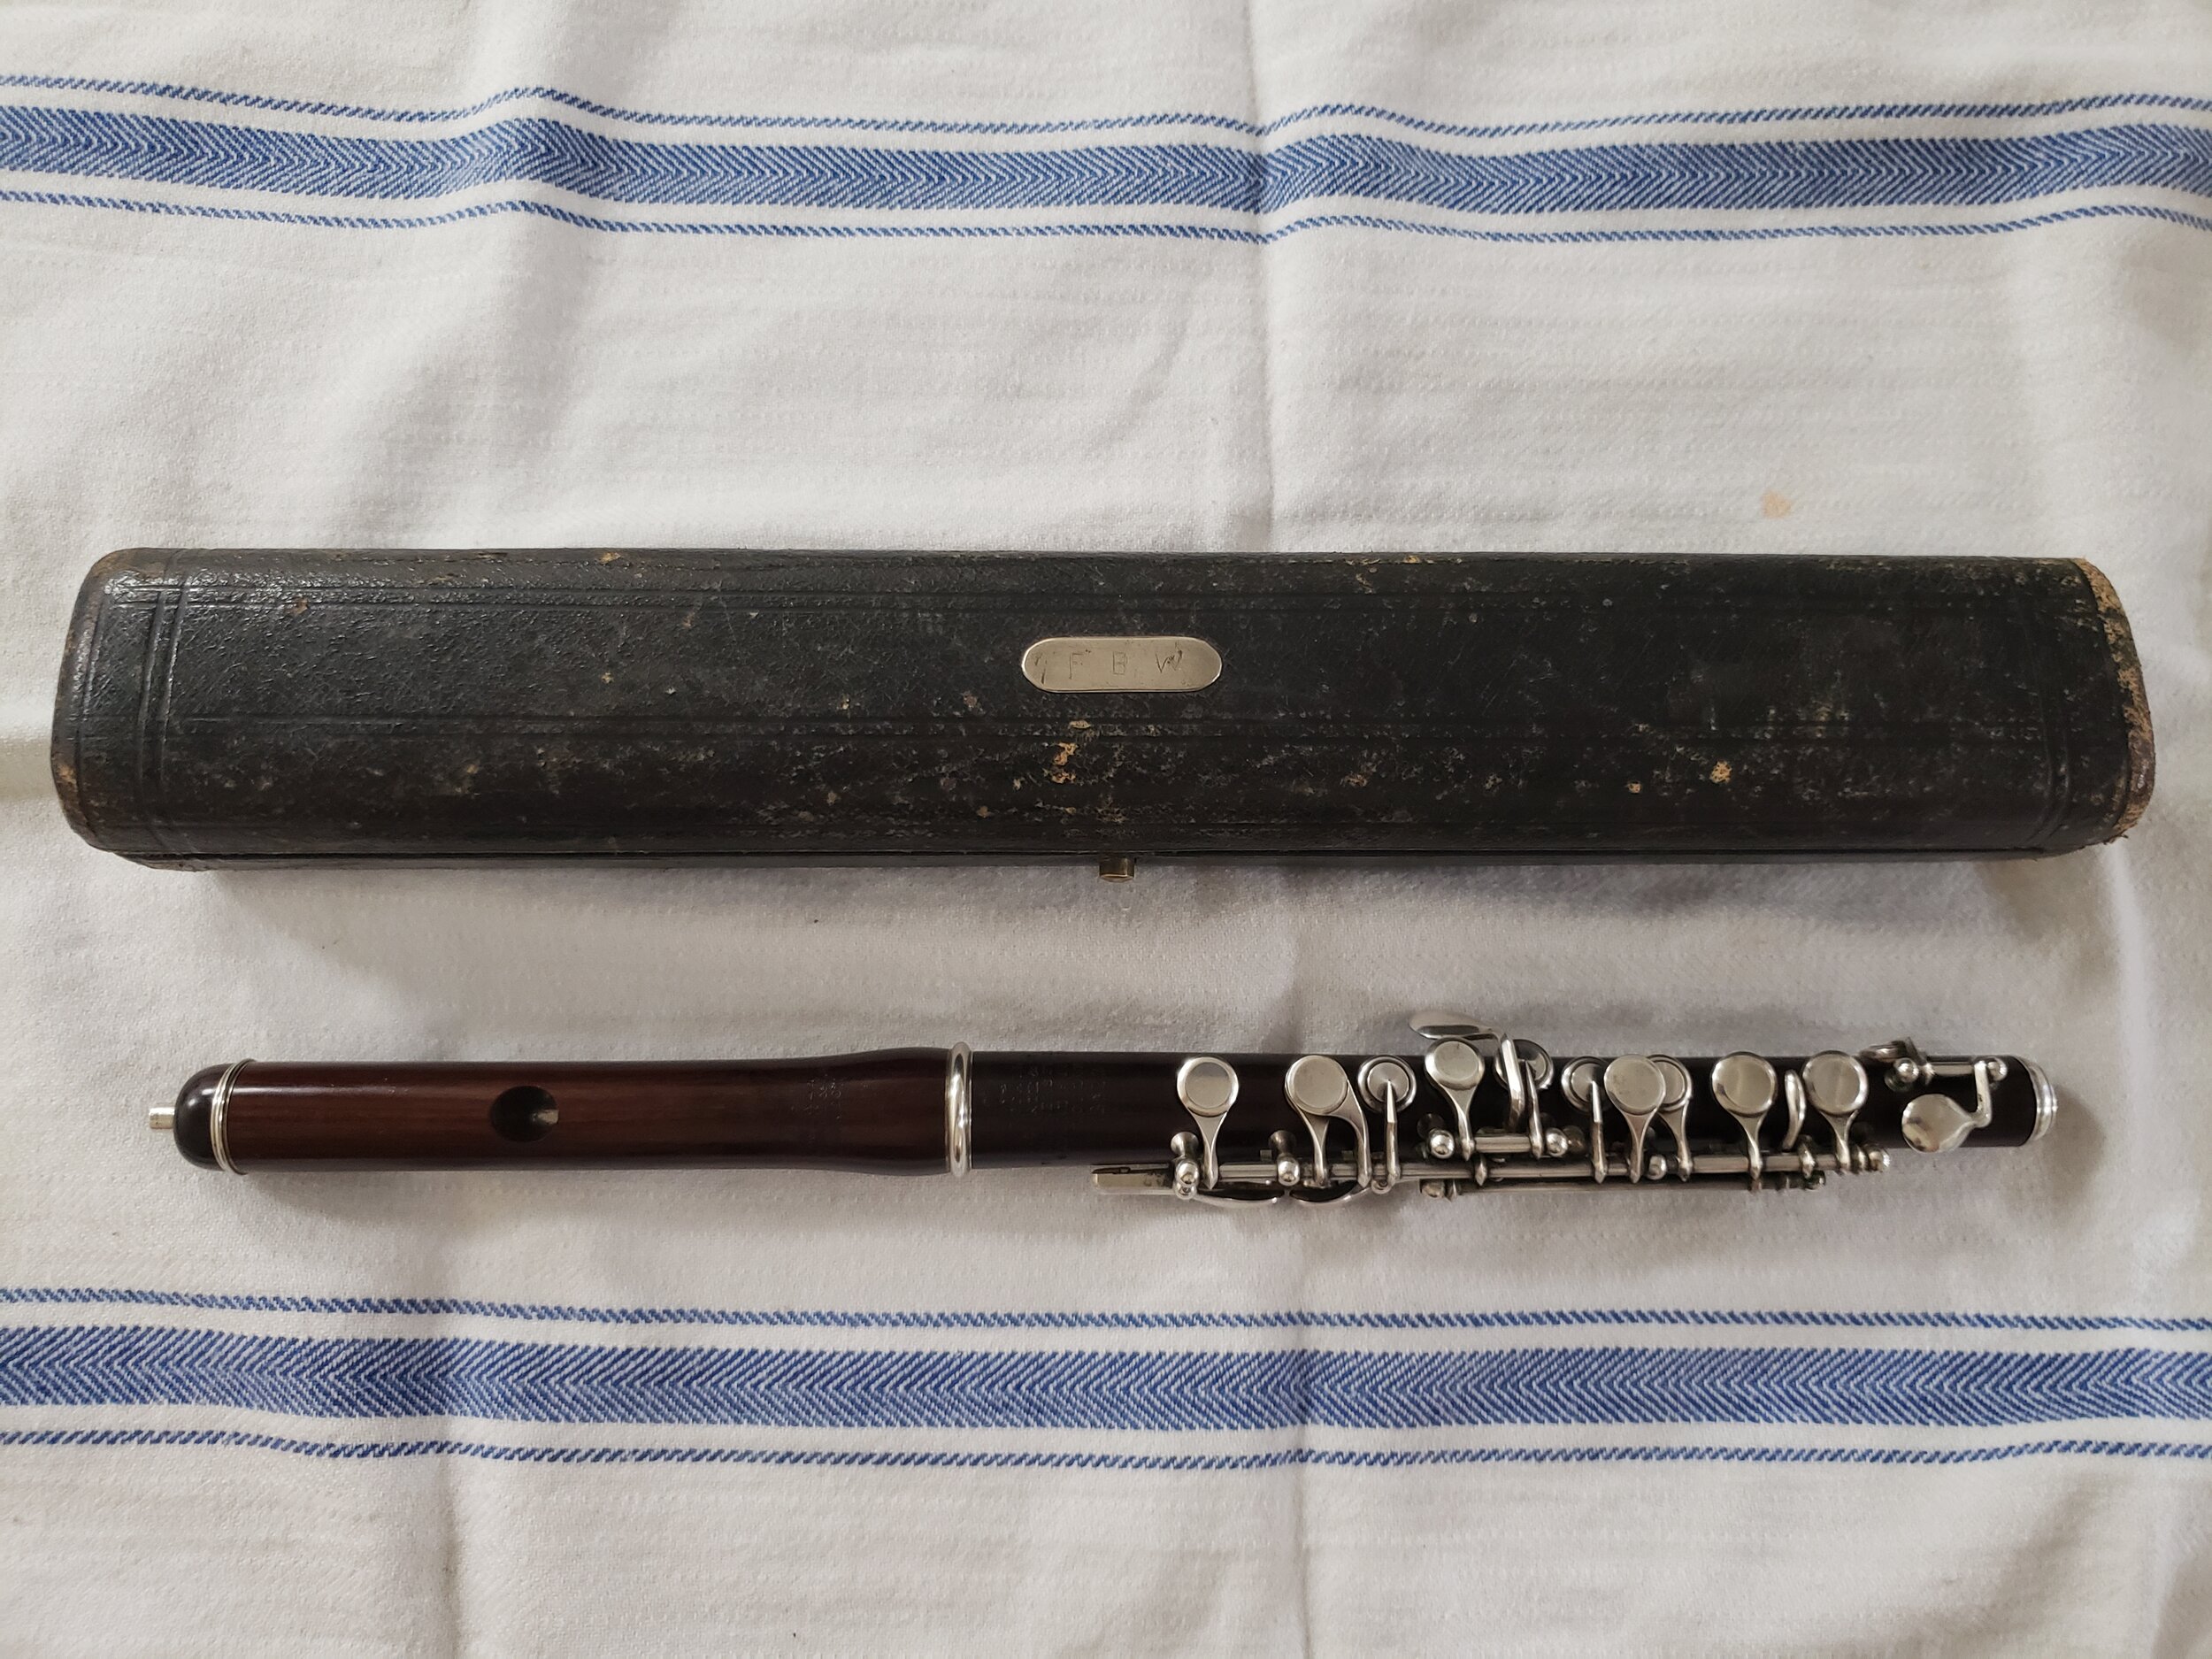  Rudall Carte “Guard’s Model” Piccolo in cocuswood with silver keys.  